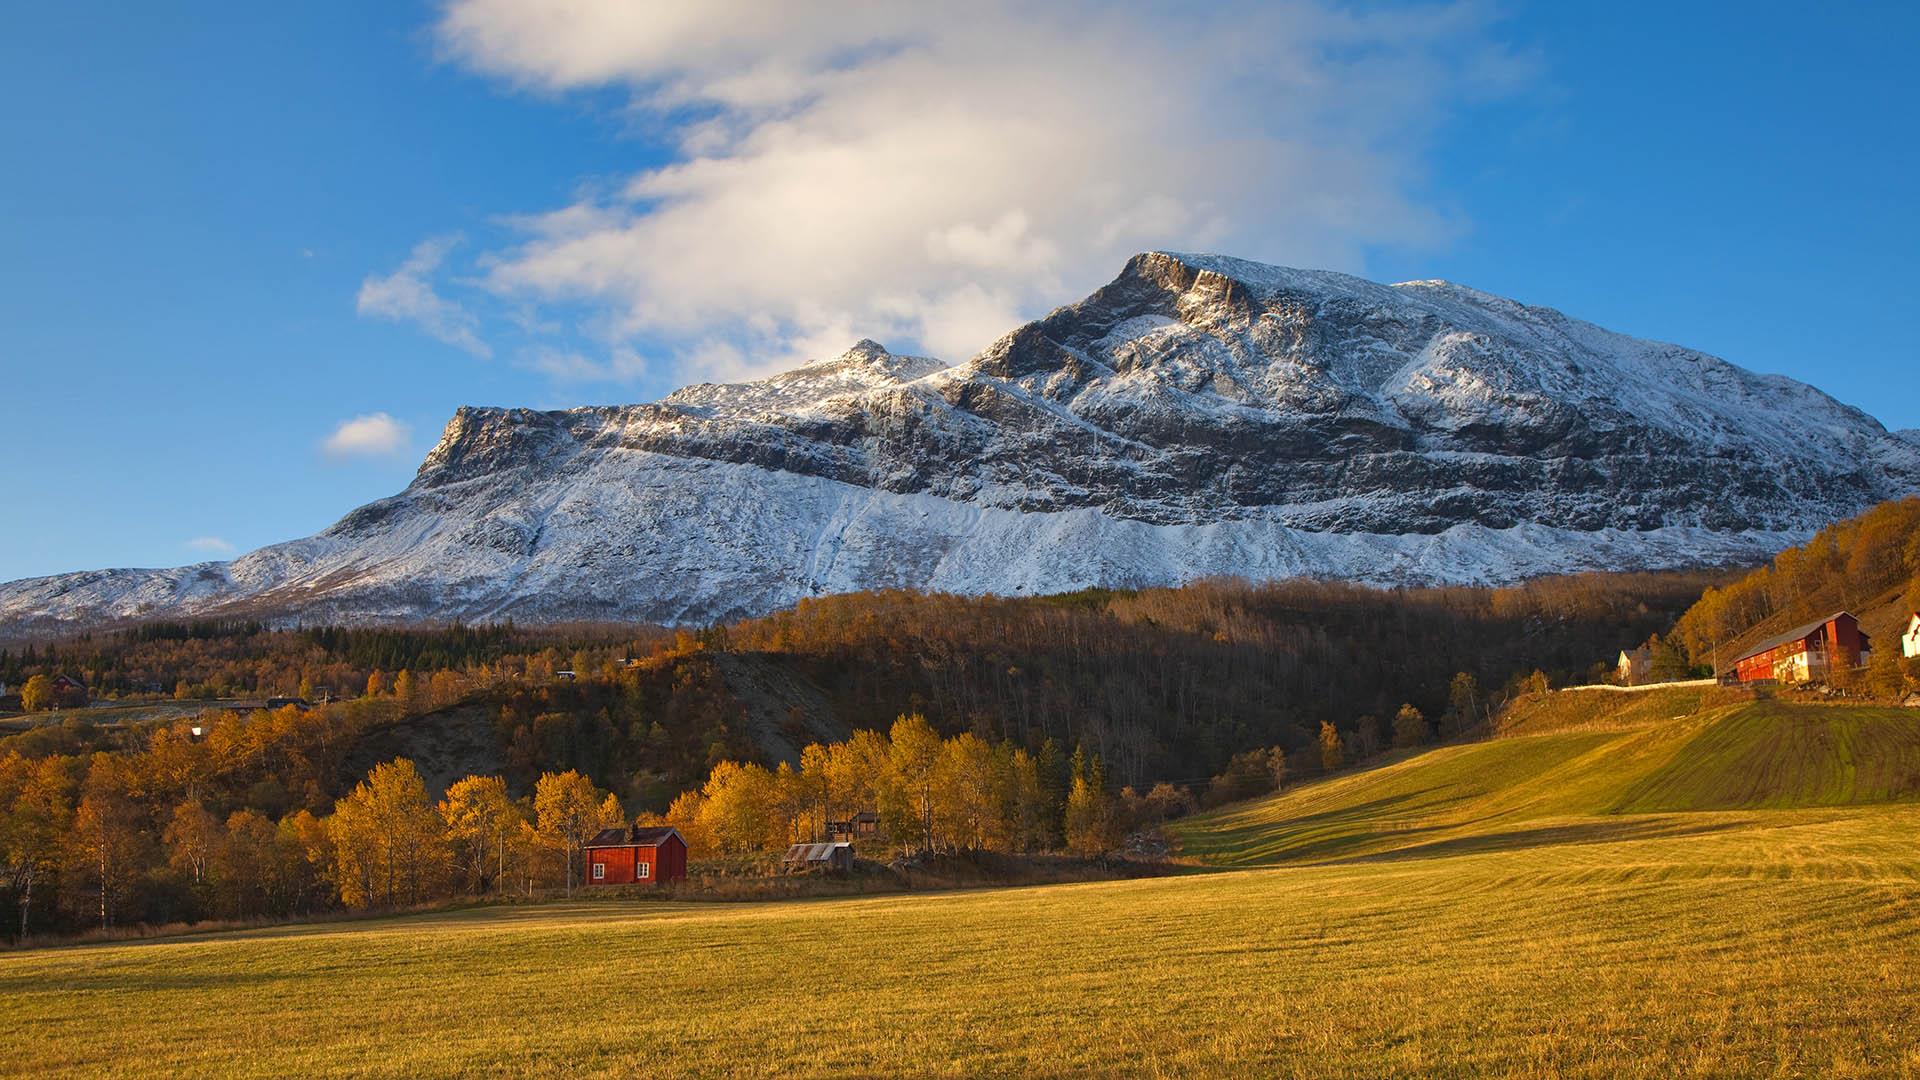 Autumn scene with yellow field and yellow-orange birch trees behind the field. The background is dominated by a mighty mountain lightly covered with new snow.